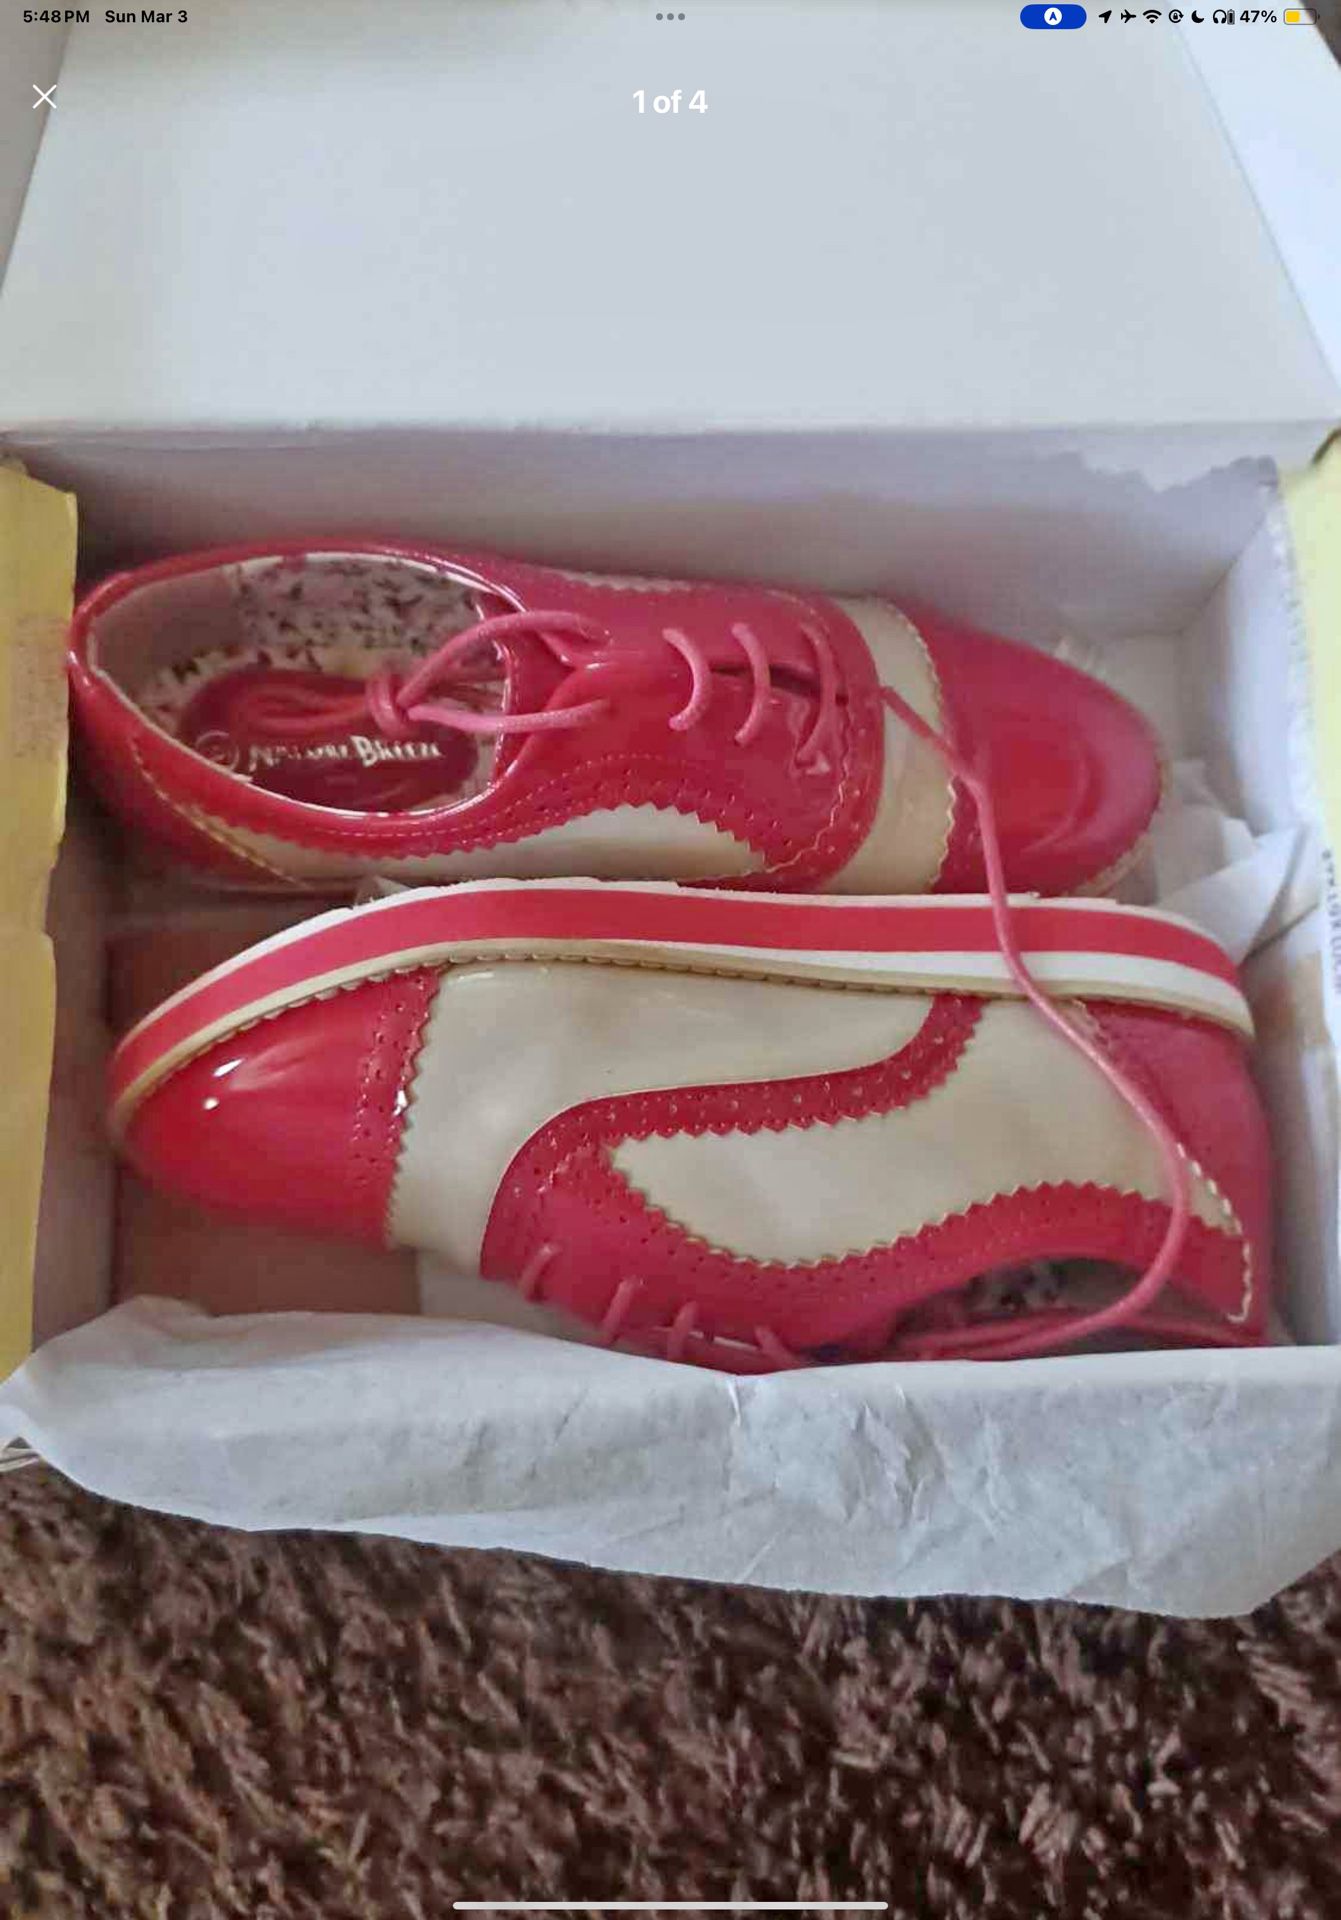 New in box Nature Breeze womens red and tan Journey 01 style several sizes